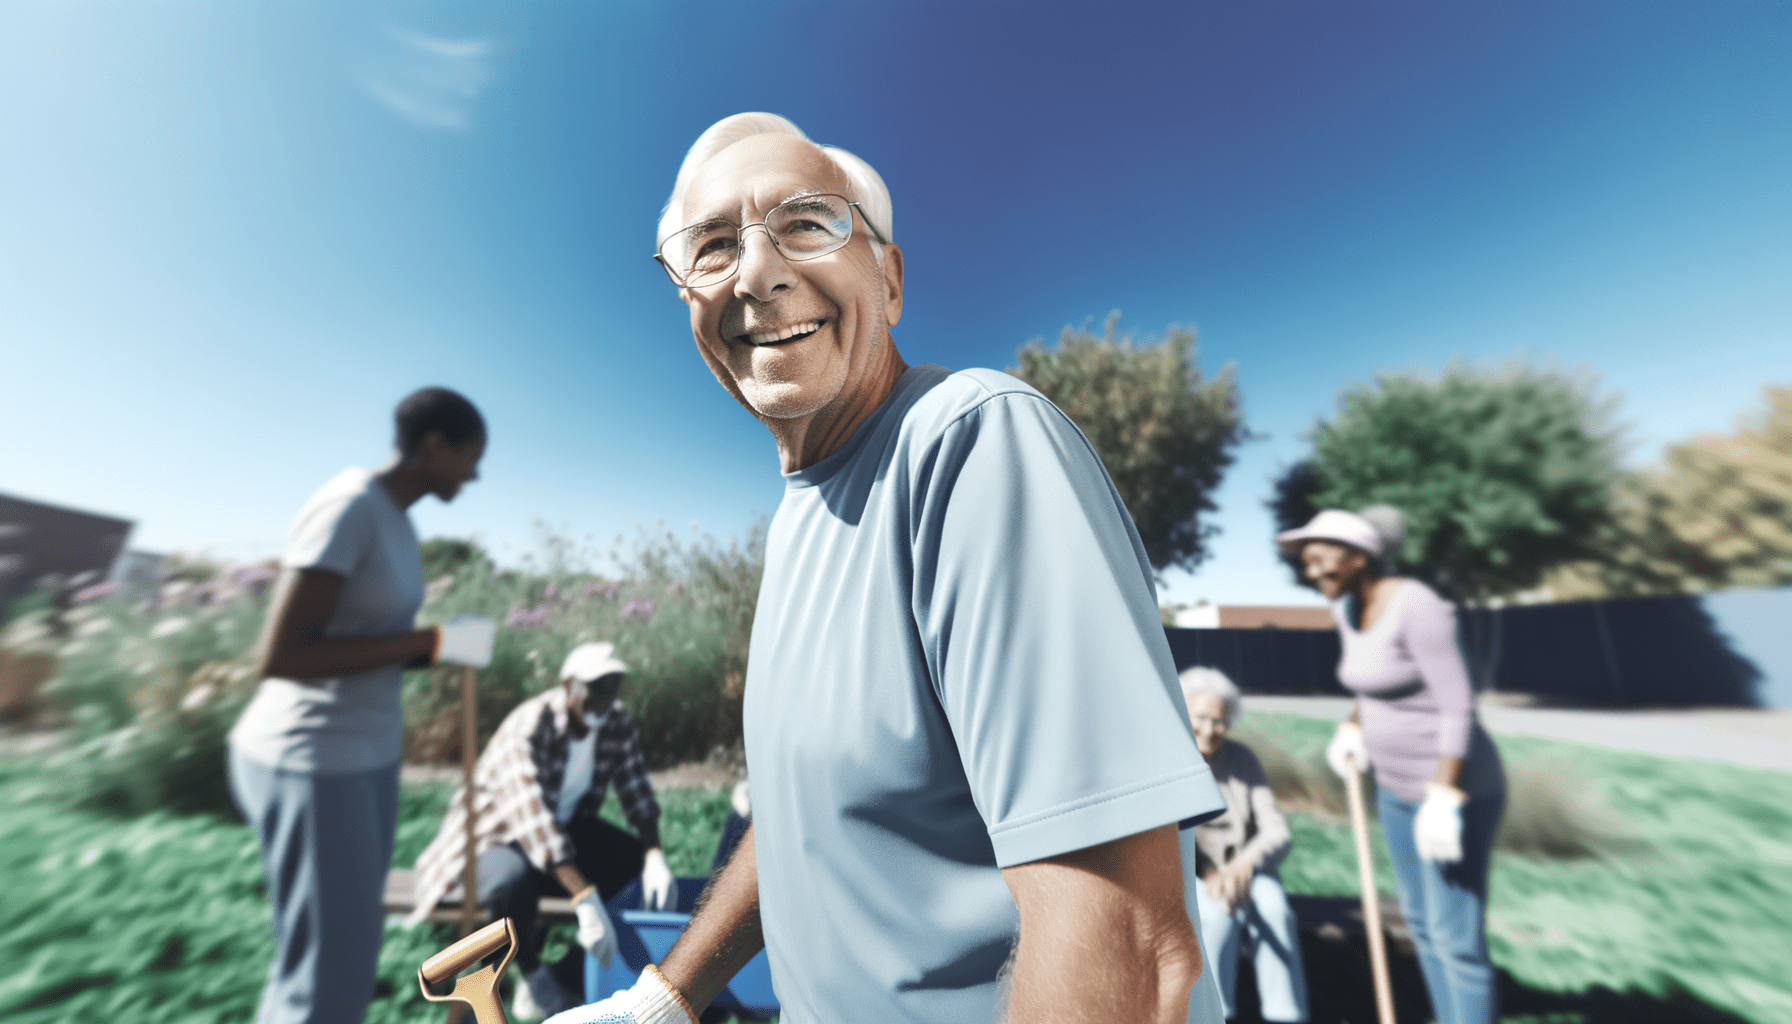 Senior Service: How Volunteering Can Enhance Your Retirement Years